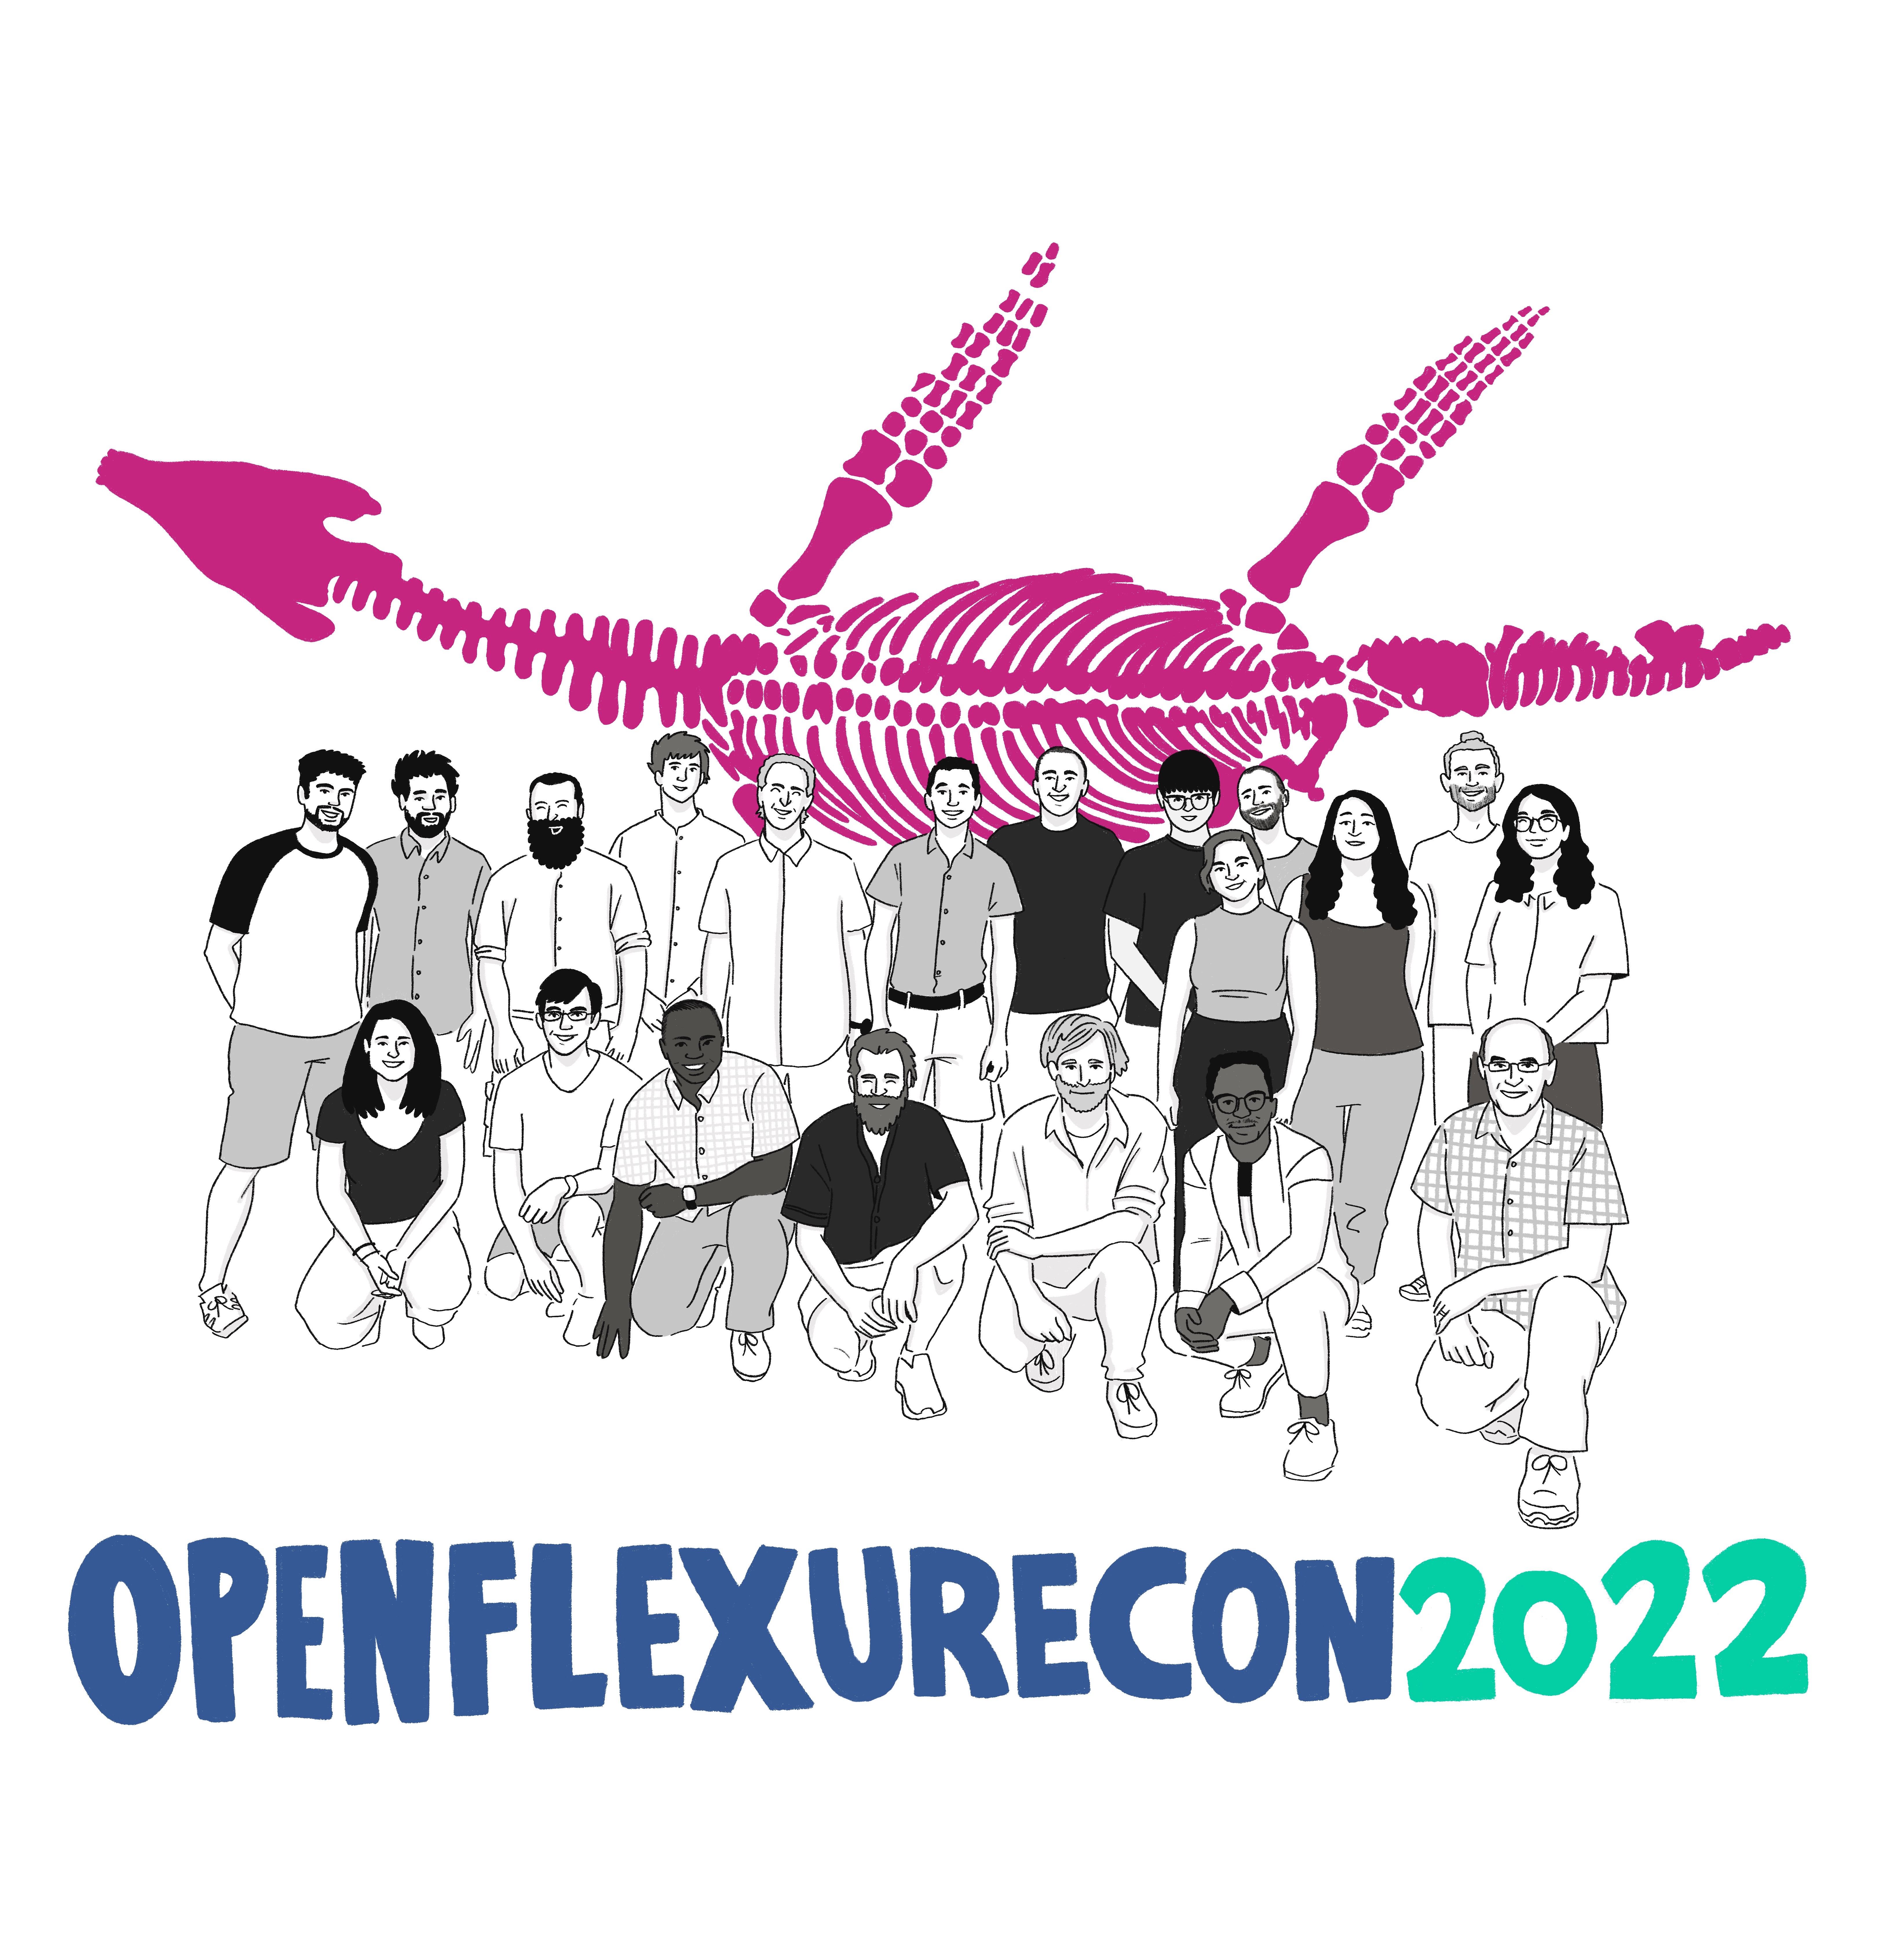 Group photo at OpenFlexureCon 2022